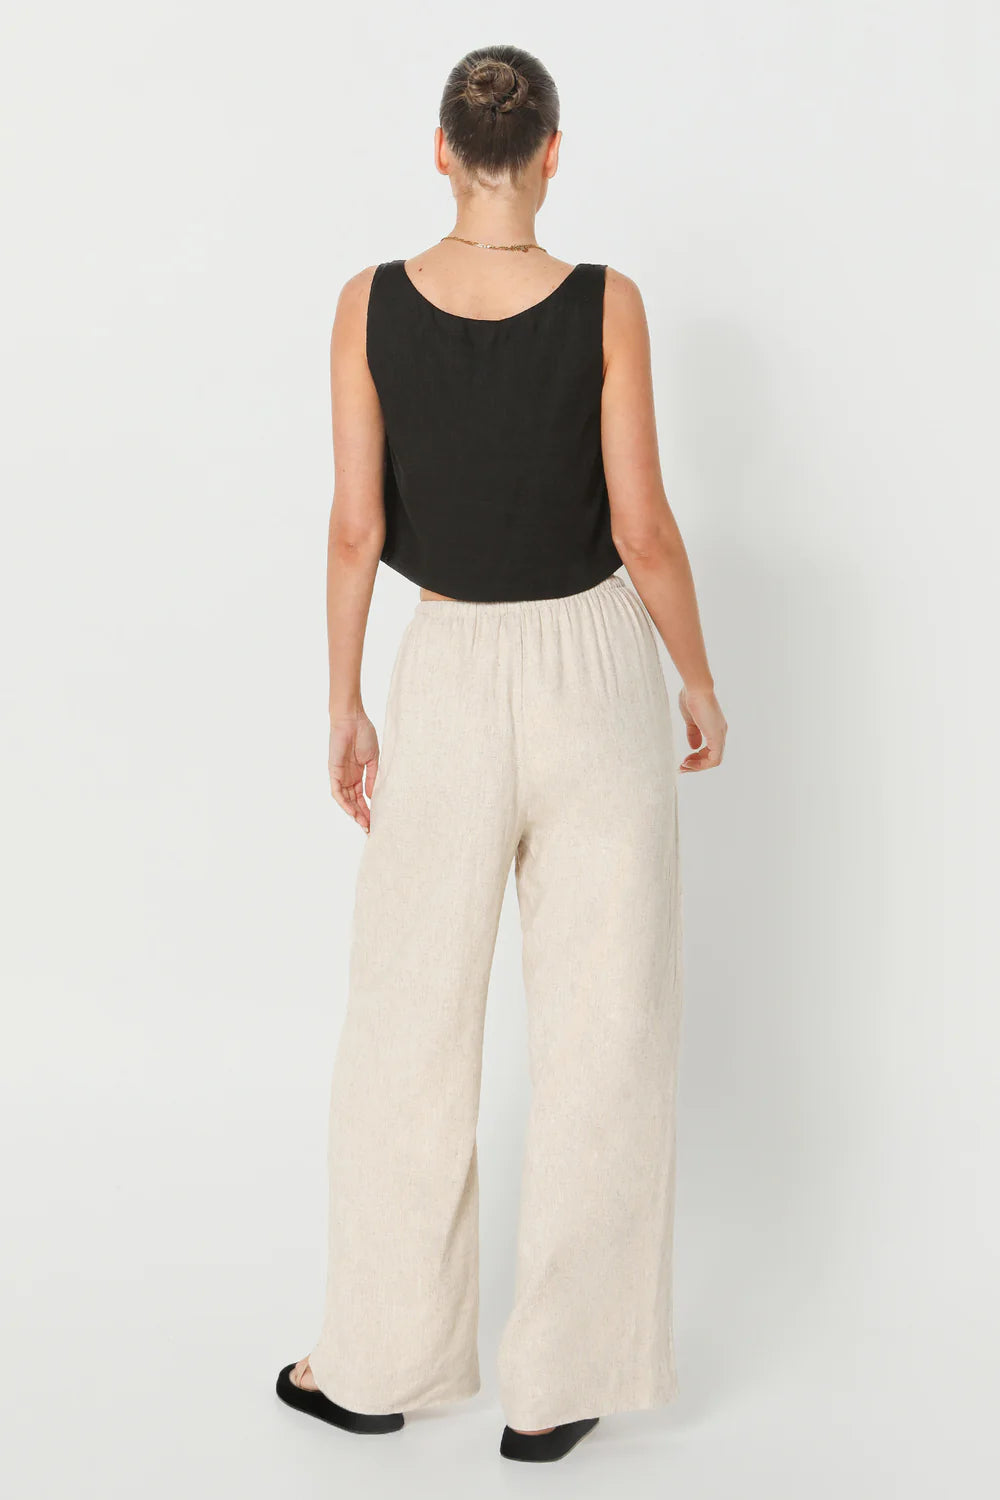 The Celeste Top Lost In Lunar in black is a relaxed fit top with a square neckline, thick straps, and a cropped length.